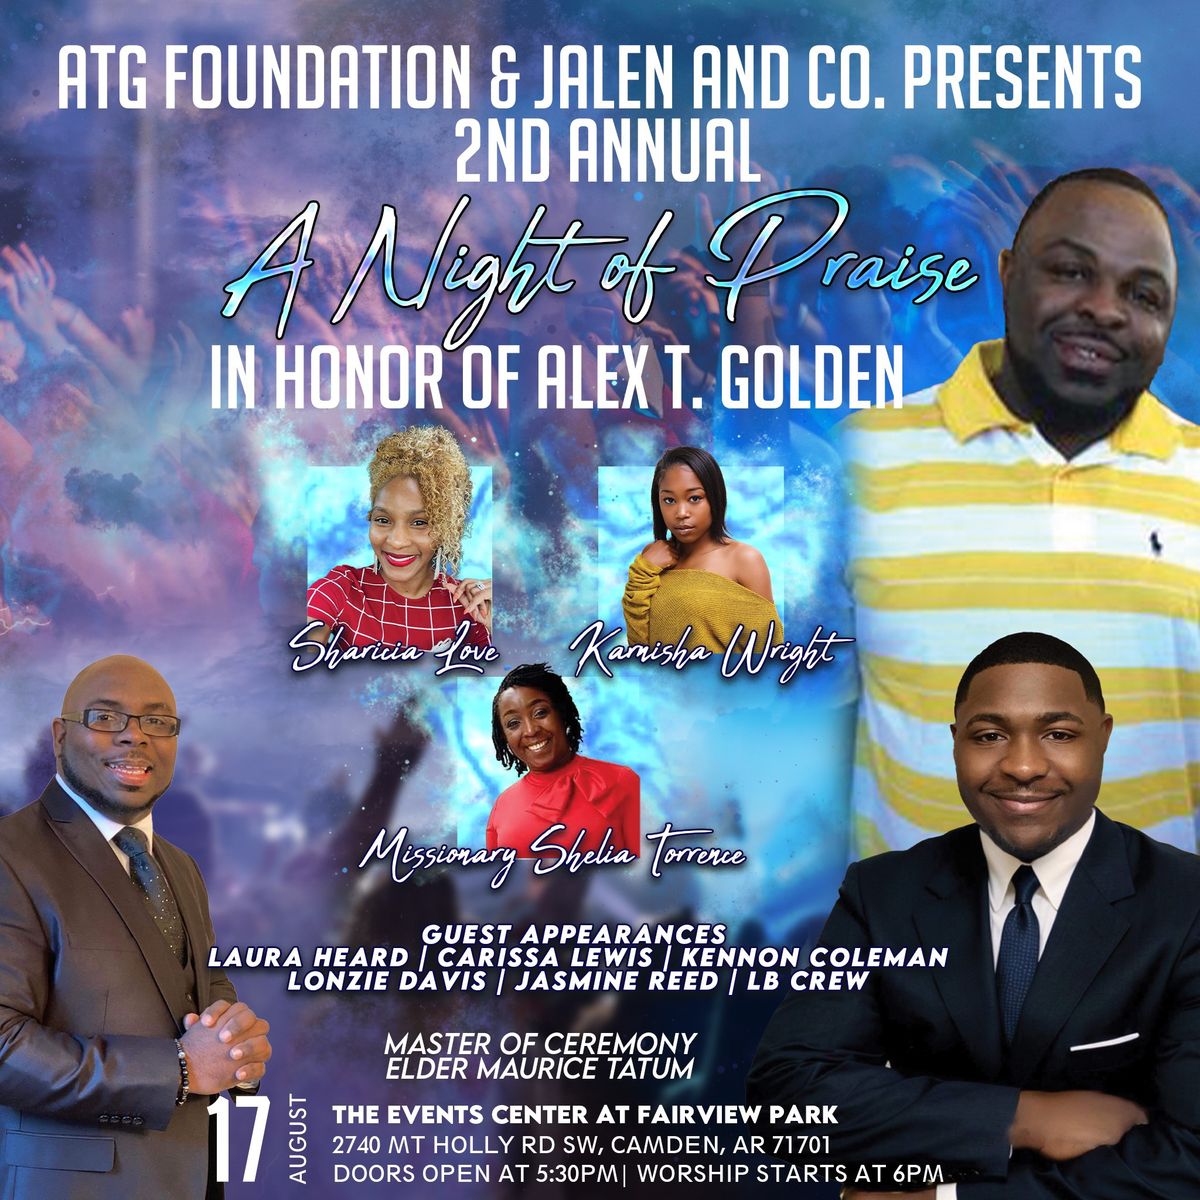 ATG Foundation & Jalen and Co. Present 2nd Annual A Night of Praise